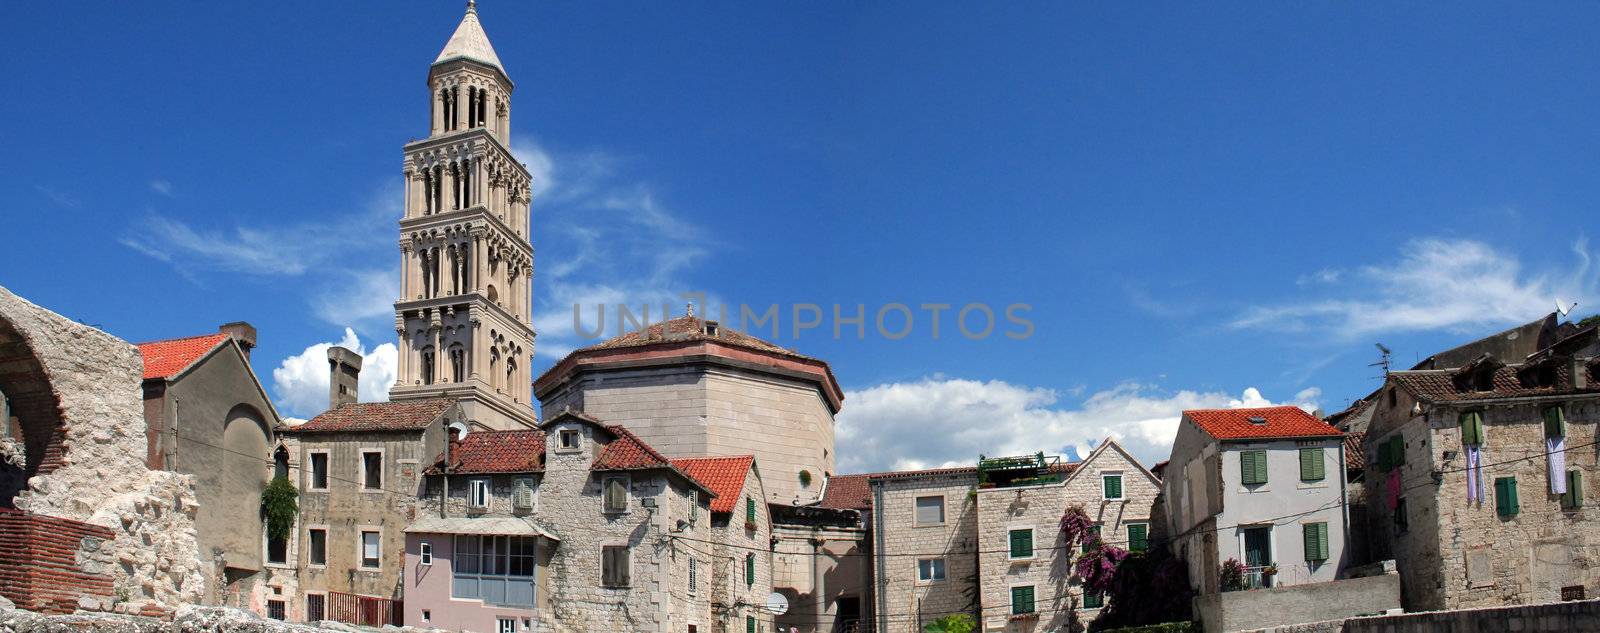 panorama of old town in Split by furzyk73